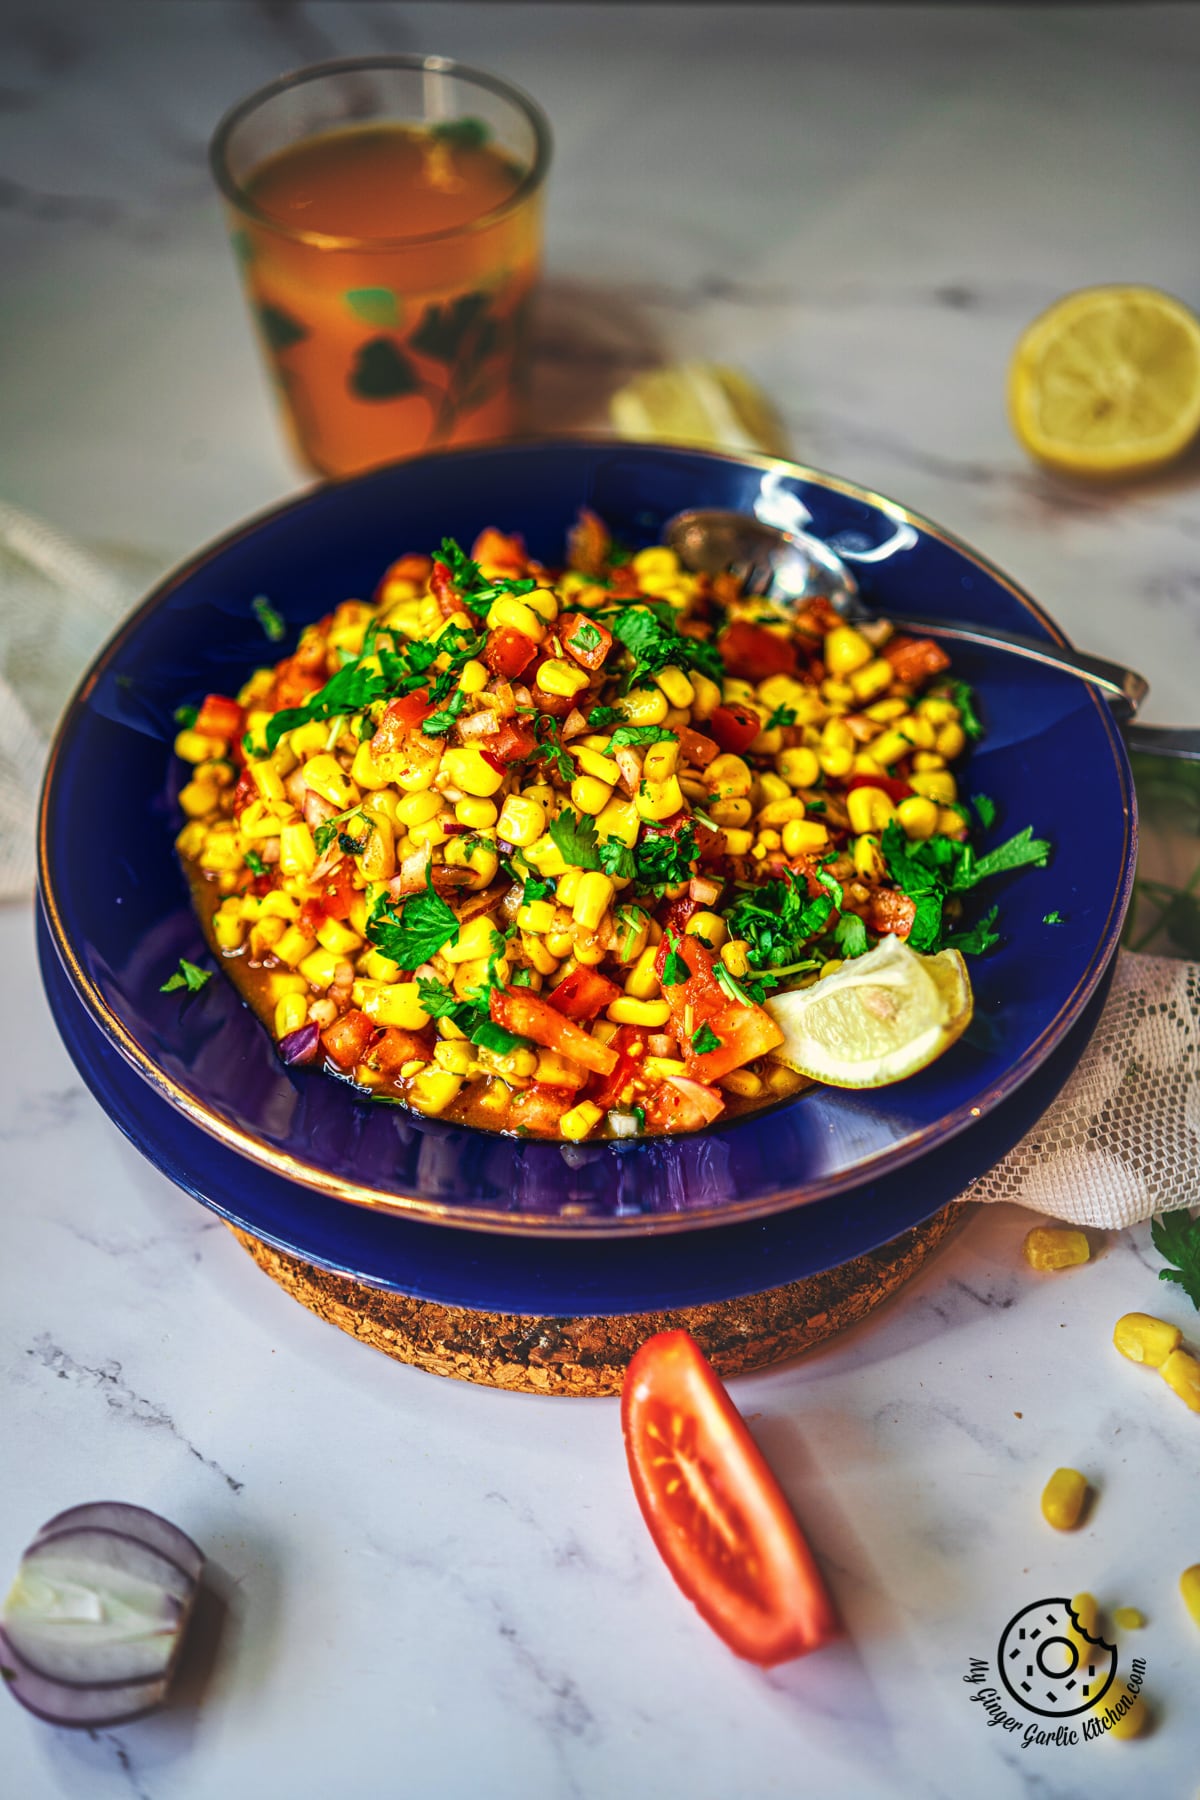 Corn Chaat Recipe. Sweet Corn Chaat served in a blue plate